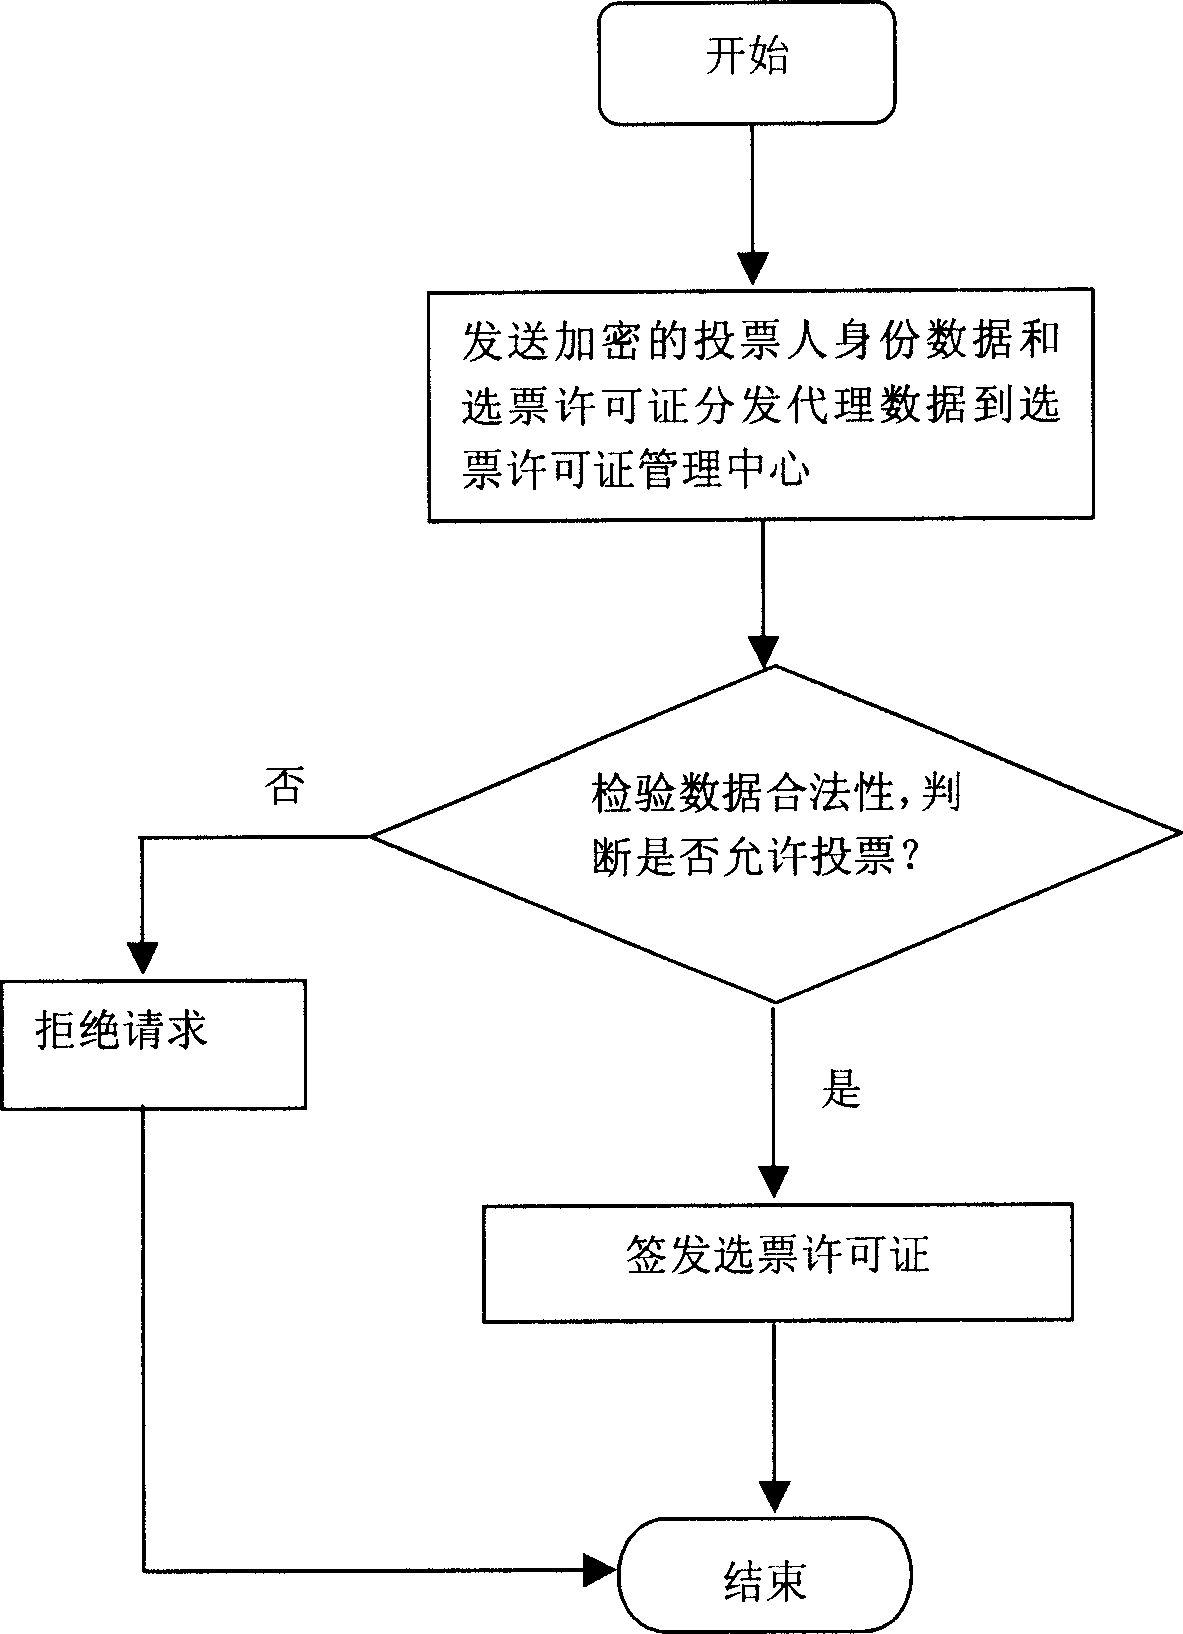 Large disclosed internet voting system and method